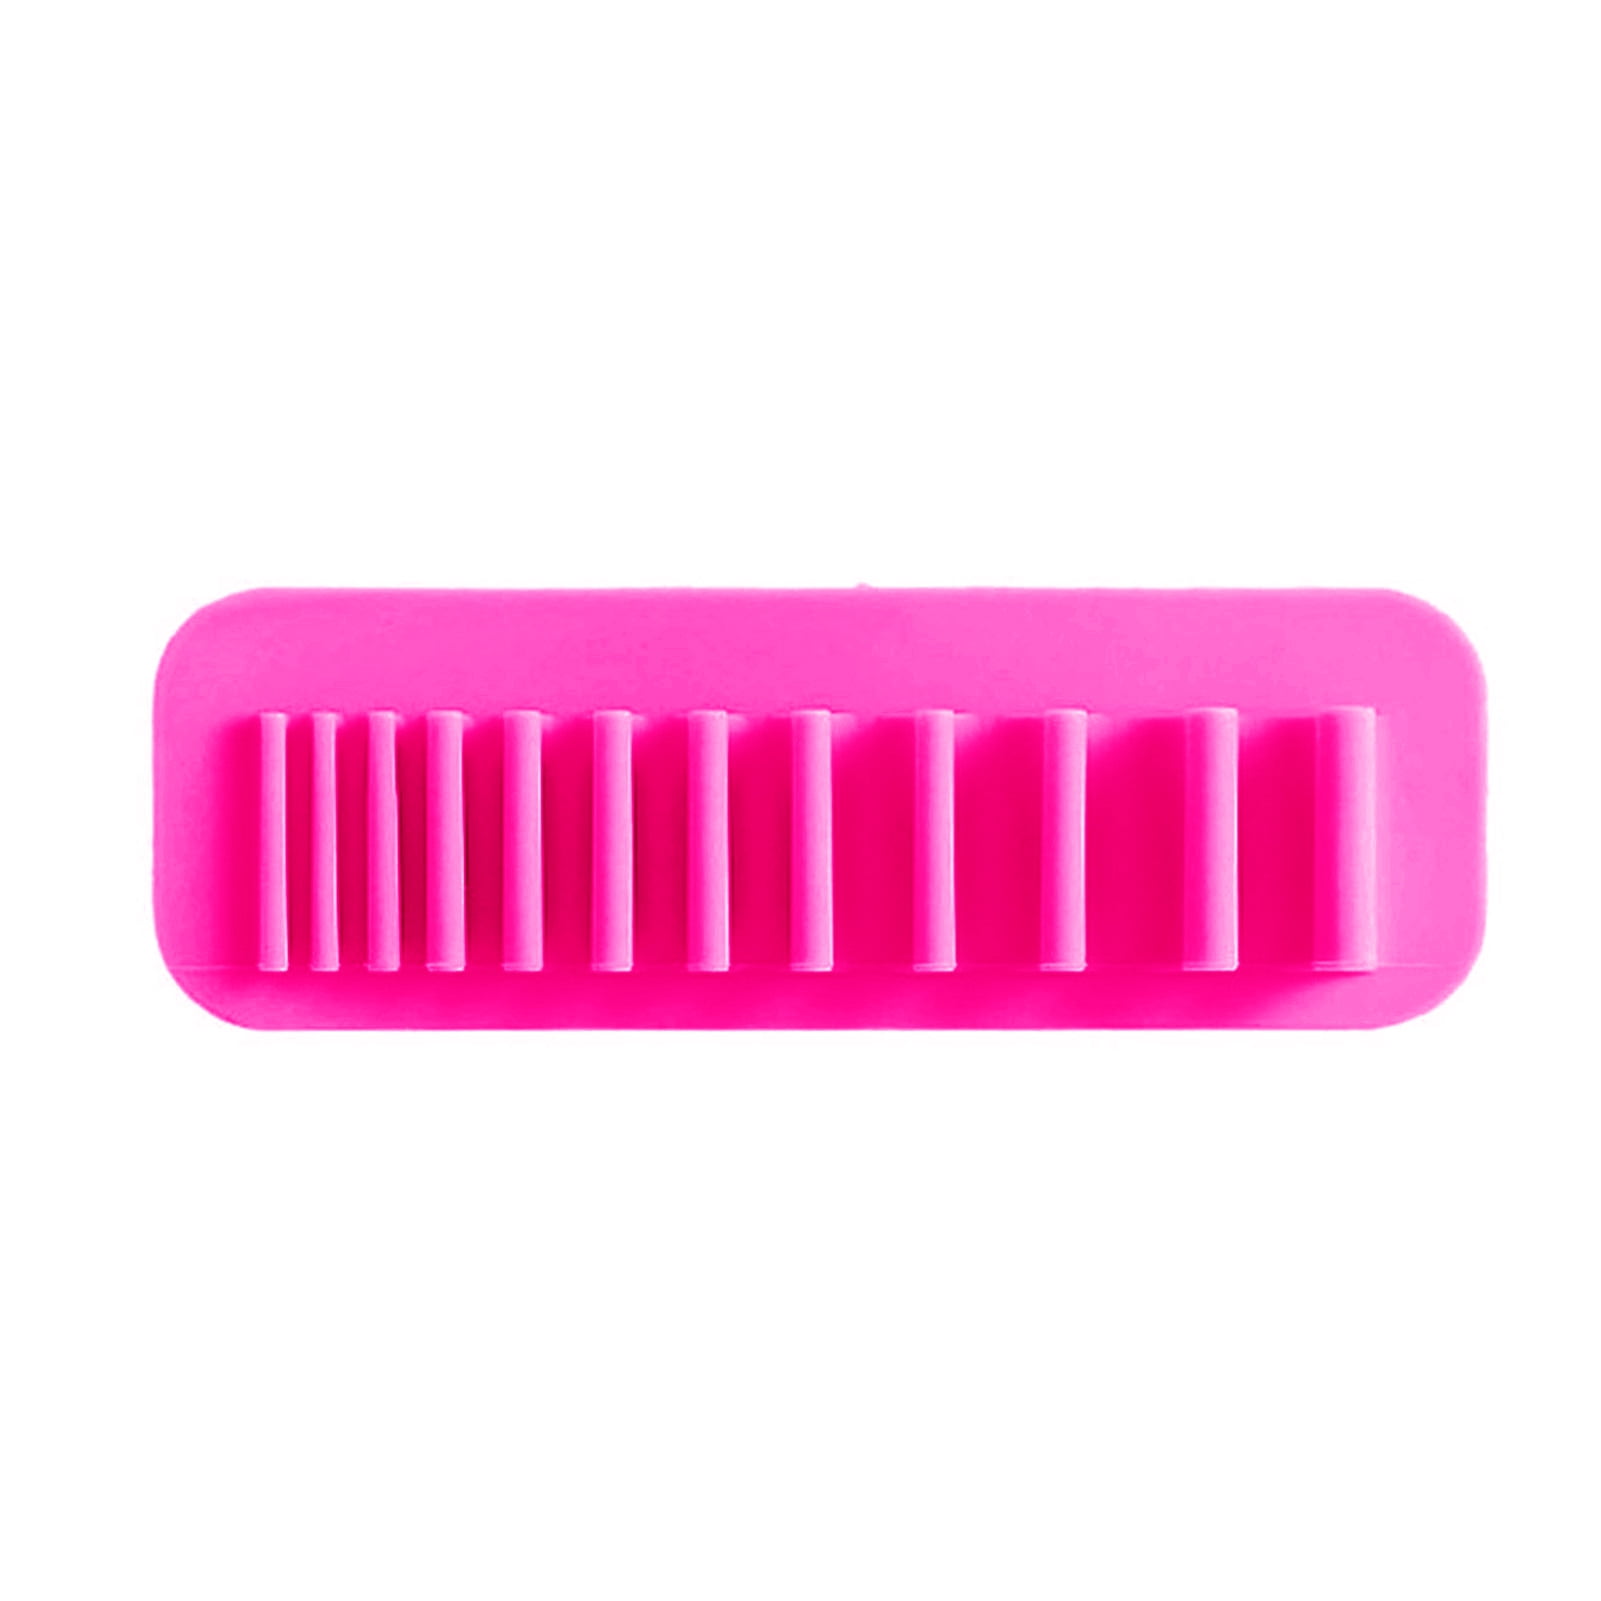 Silicone Makeup Brush Holder Wall-mounted Soft Durable Reusable Convenient  Easy Operation Suit Beauty Tool Display Stand Storage - Makeup Tool Kits -  AliExpress